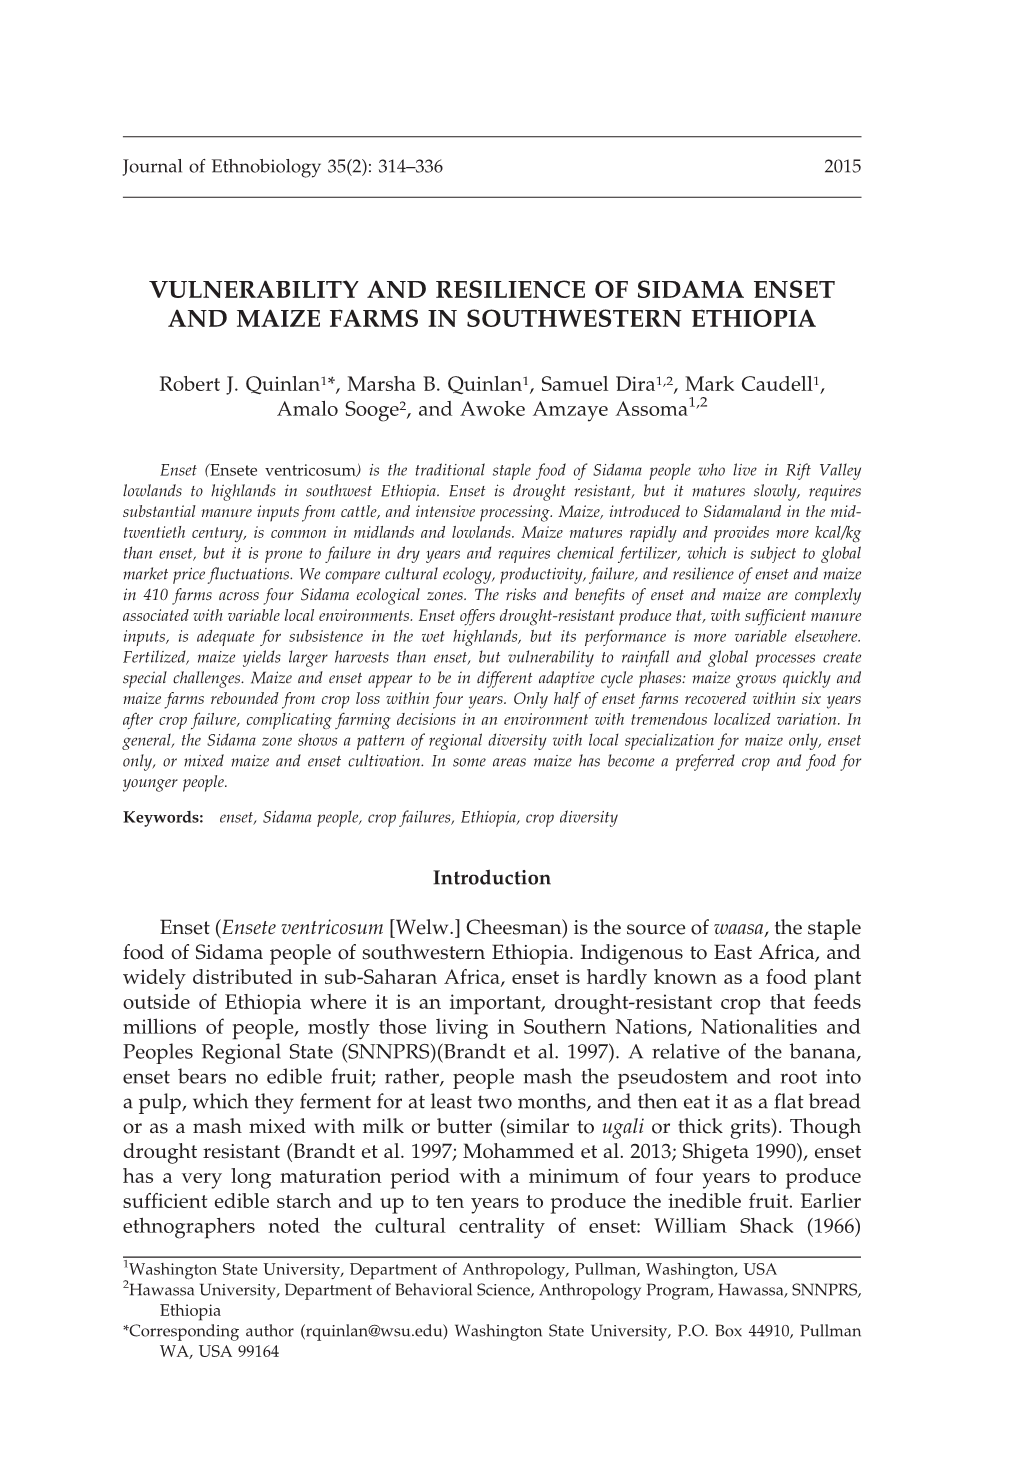 Vulnerability and Resilience of Sidama Enset and Maize Farms in Southwestern Ethiopia